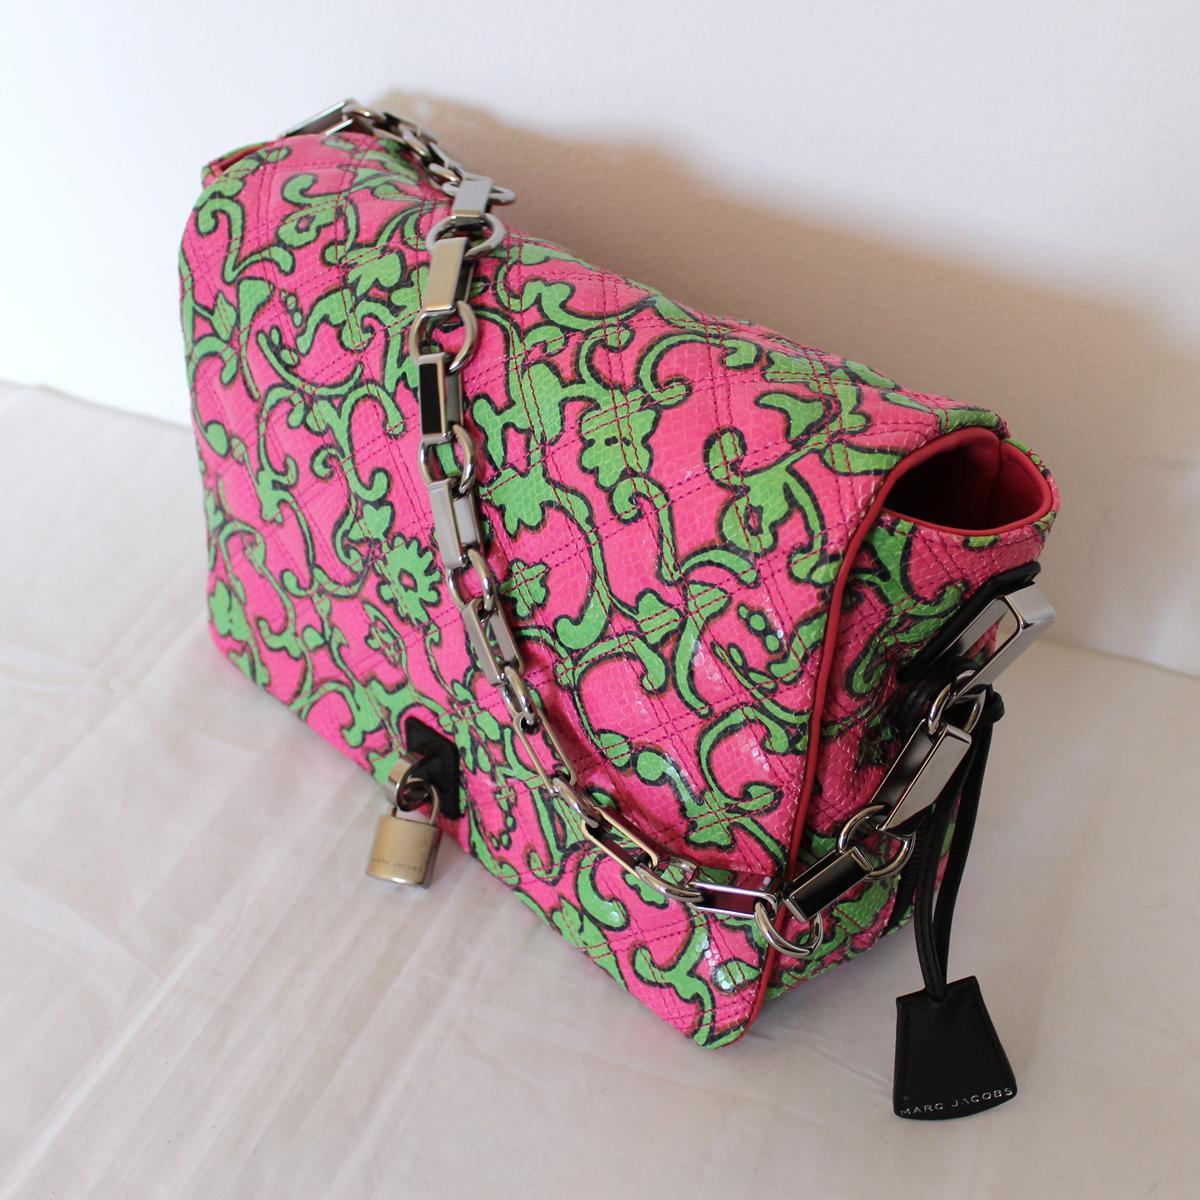 pink and green marc jacobs bag